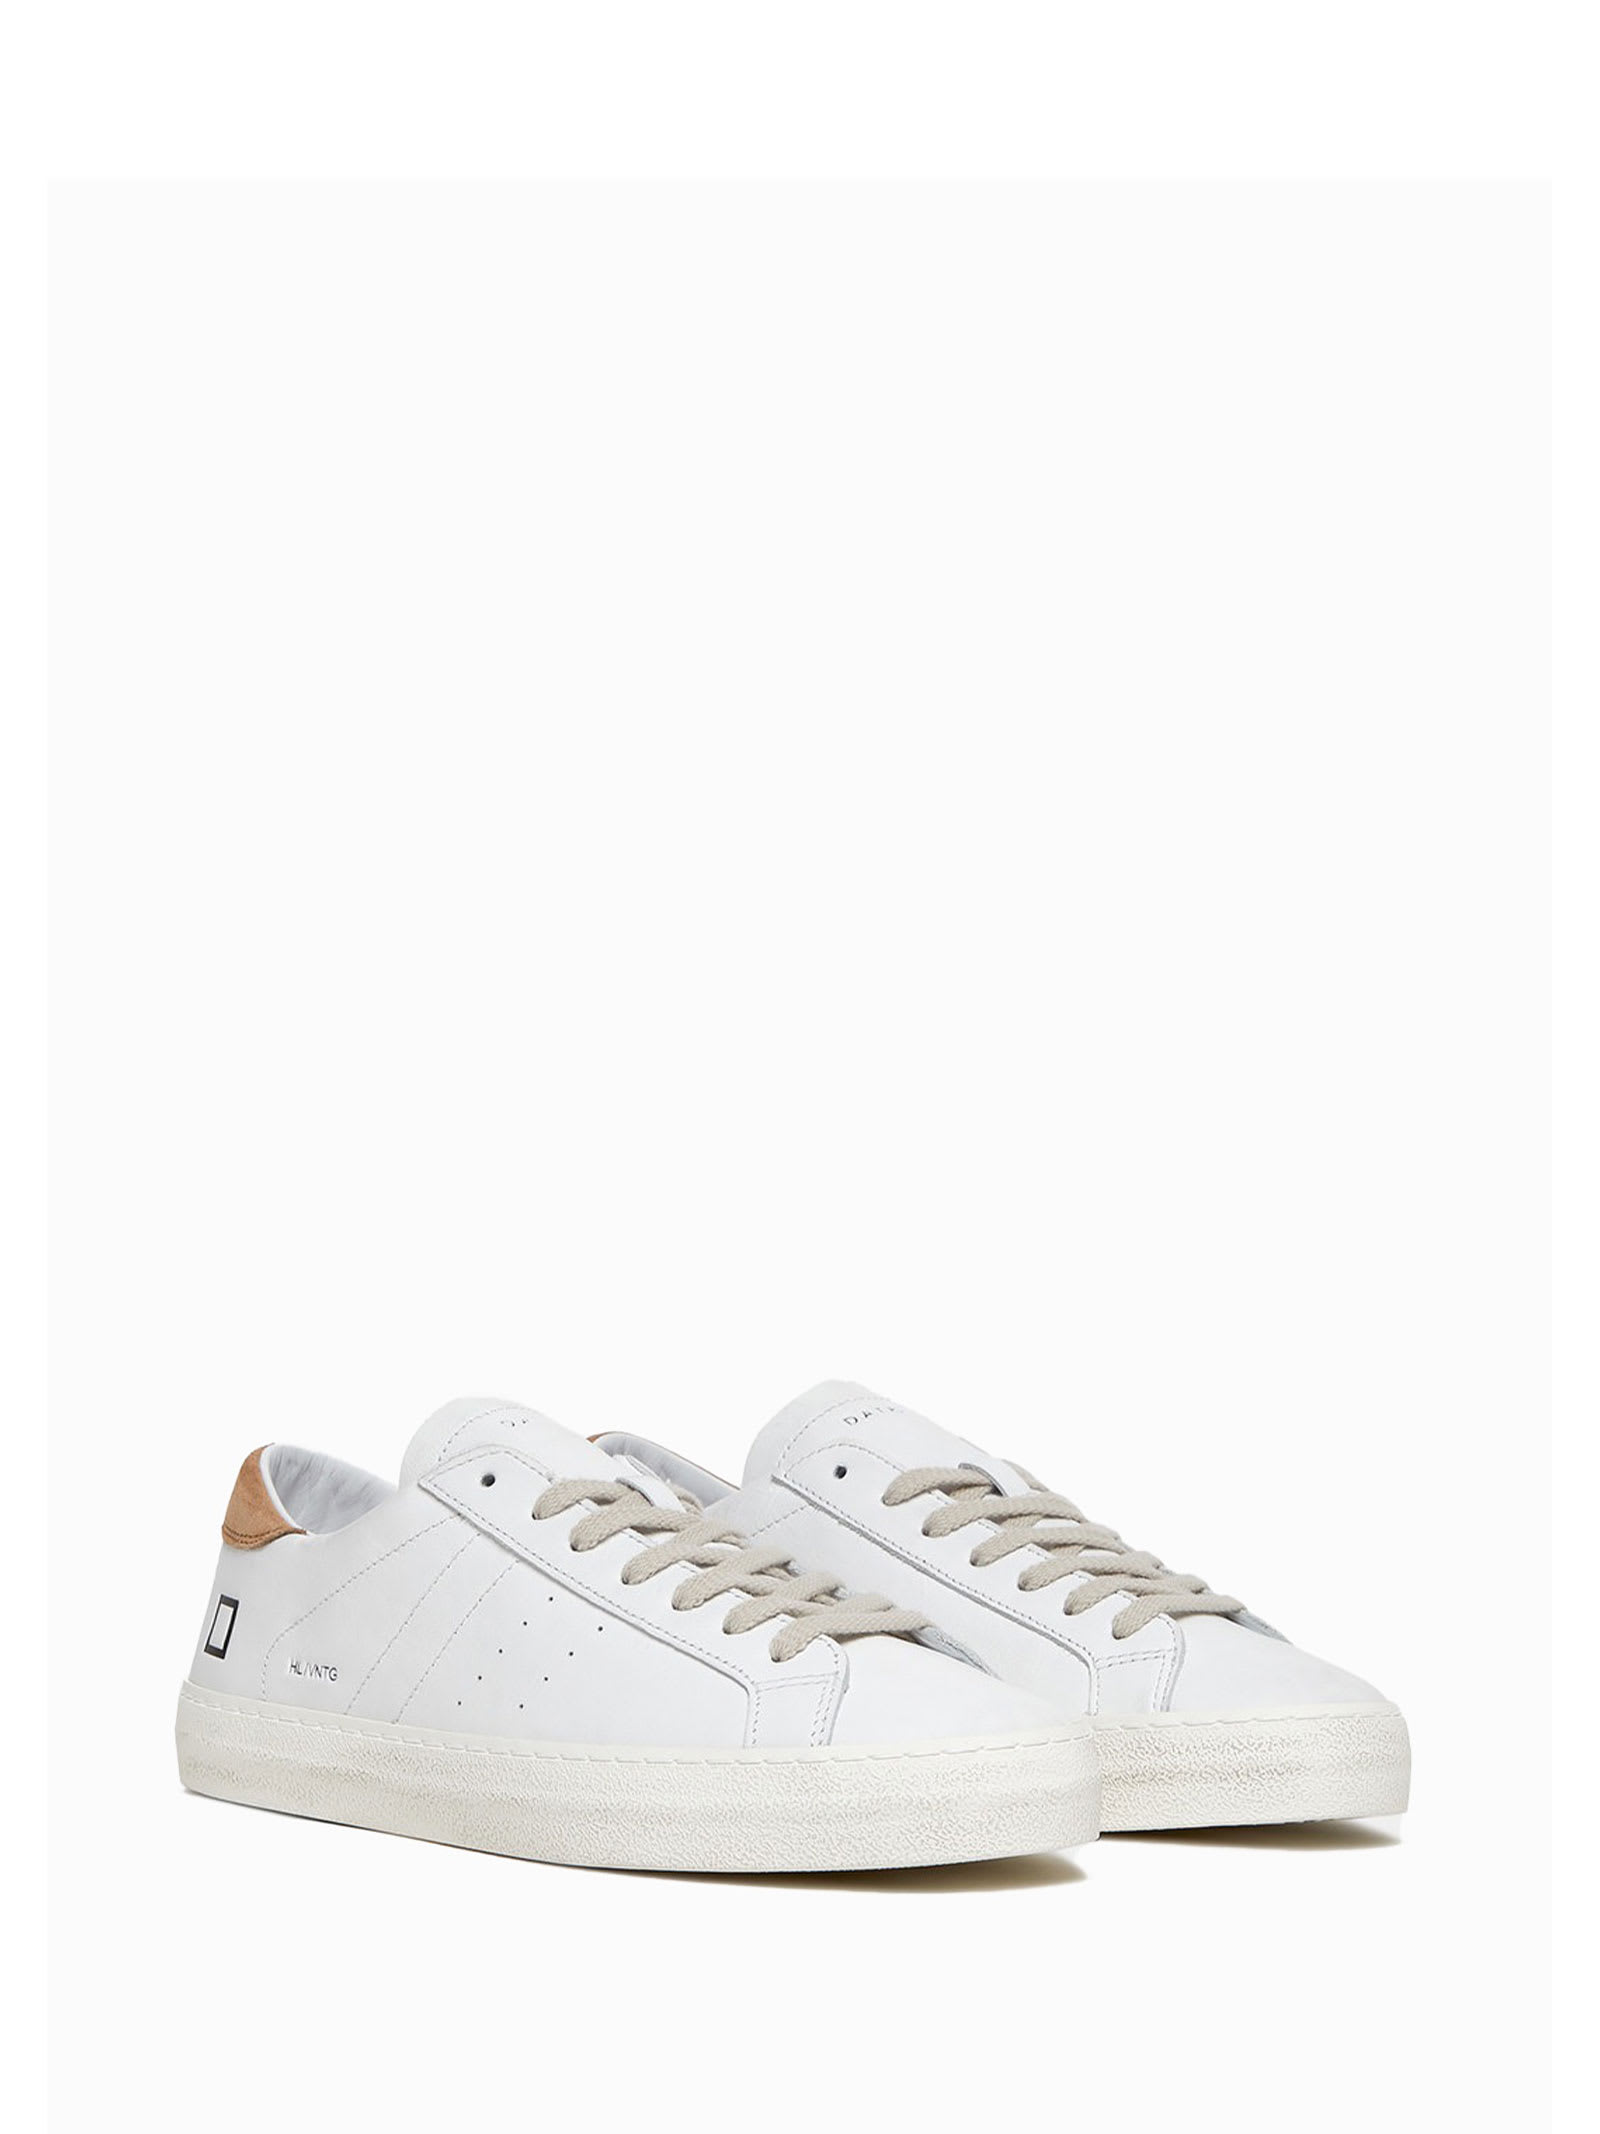 Shop Date Hill Low Vintage Mens Sneaker In Leather In White Rust